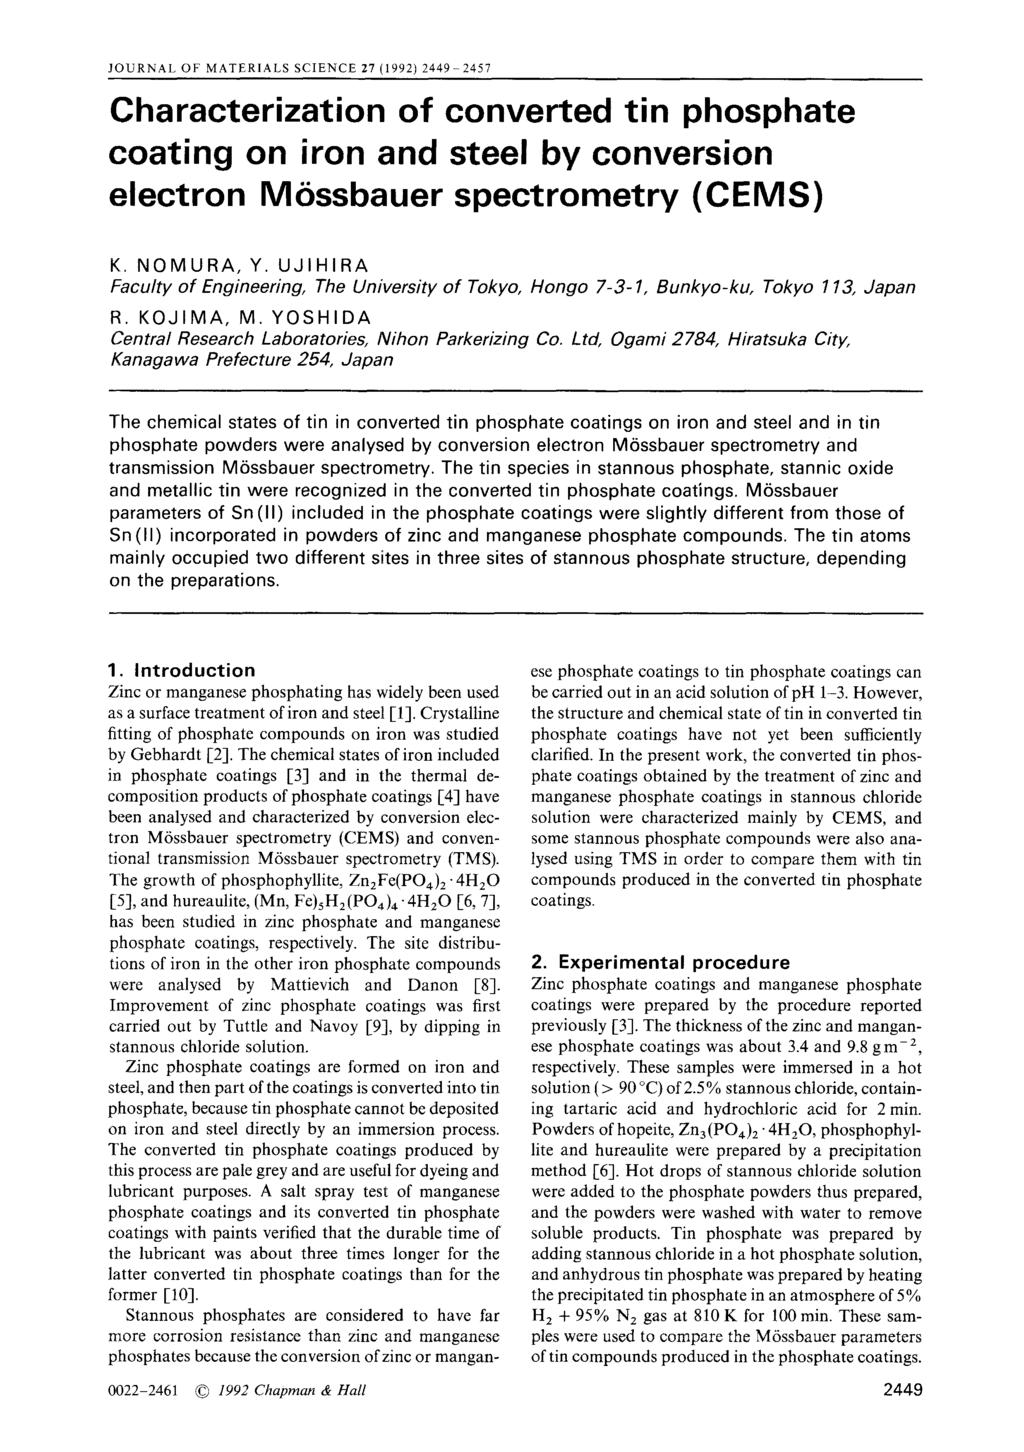 JOURNAL OF MATERALS SCENCE 27 (1992) 2449-2457 Characterization of converted tin phosphate coating on iron and steel by conversion electron M6ssbauer spectrometry (CEMS) K. NOMURA, Y.